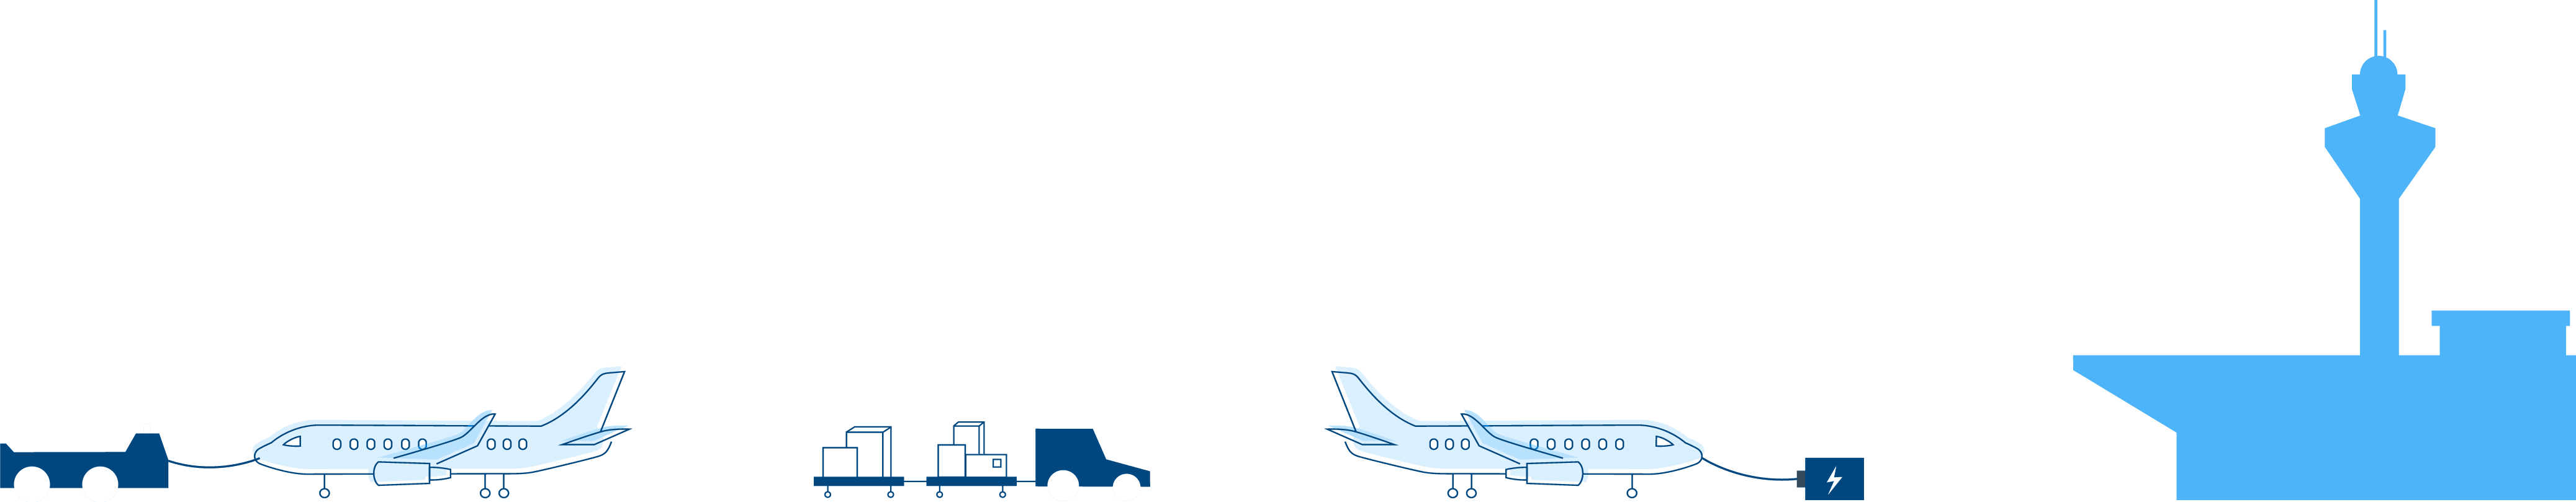 Illustration showing planes on an airport tarmac